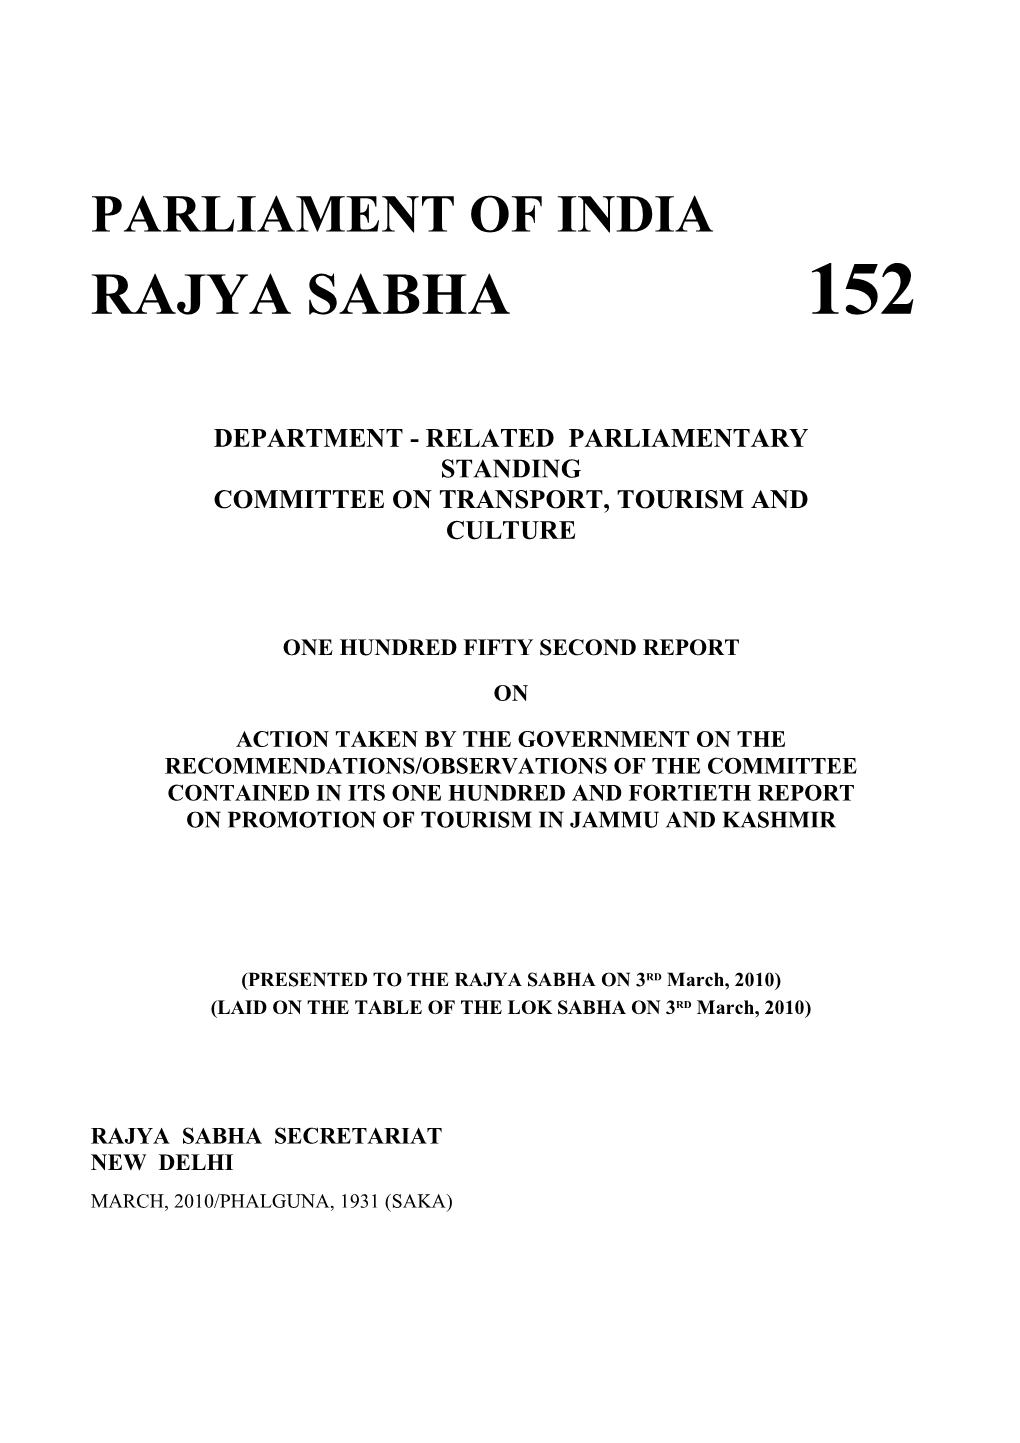 Related Parliamentary Standing Committee on Transport, Tourism and Culture